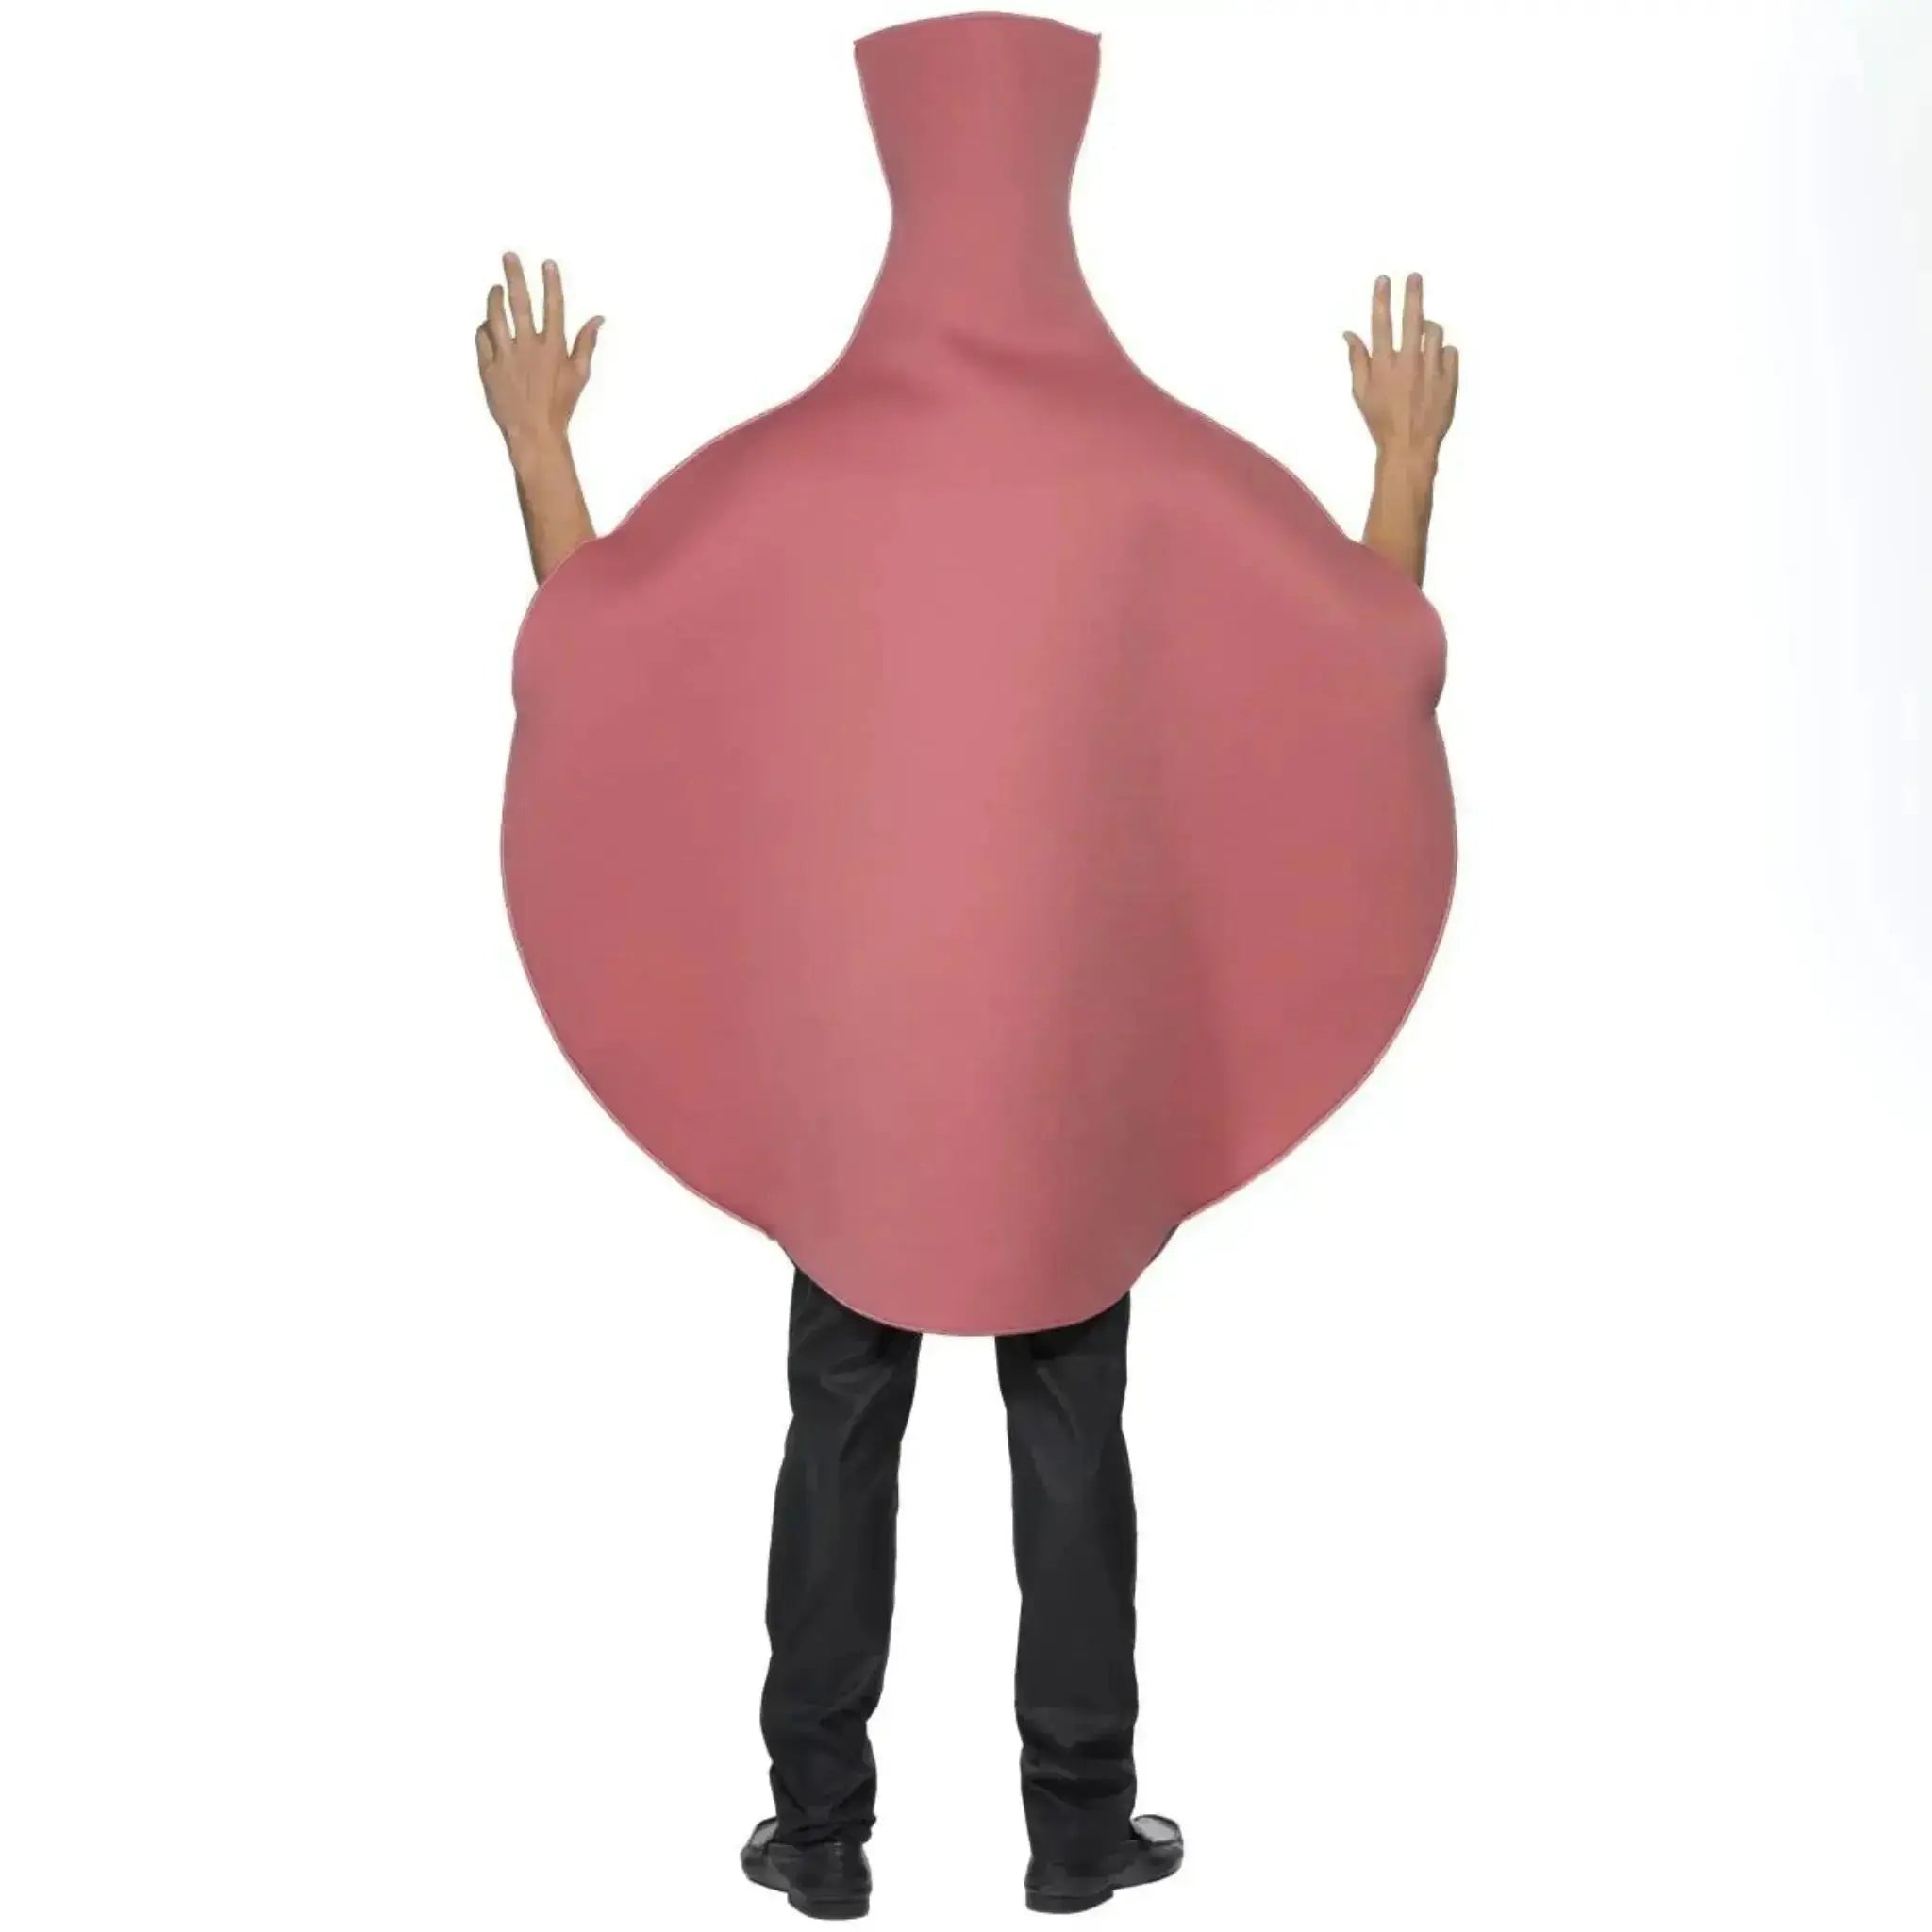 Whoopie Cushion Costume | The Party Hut